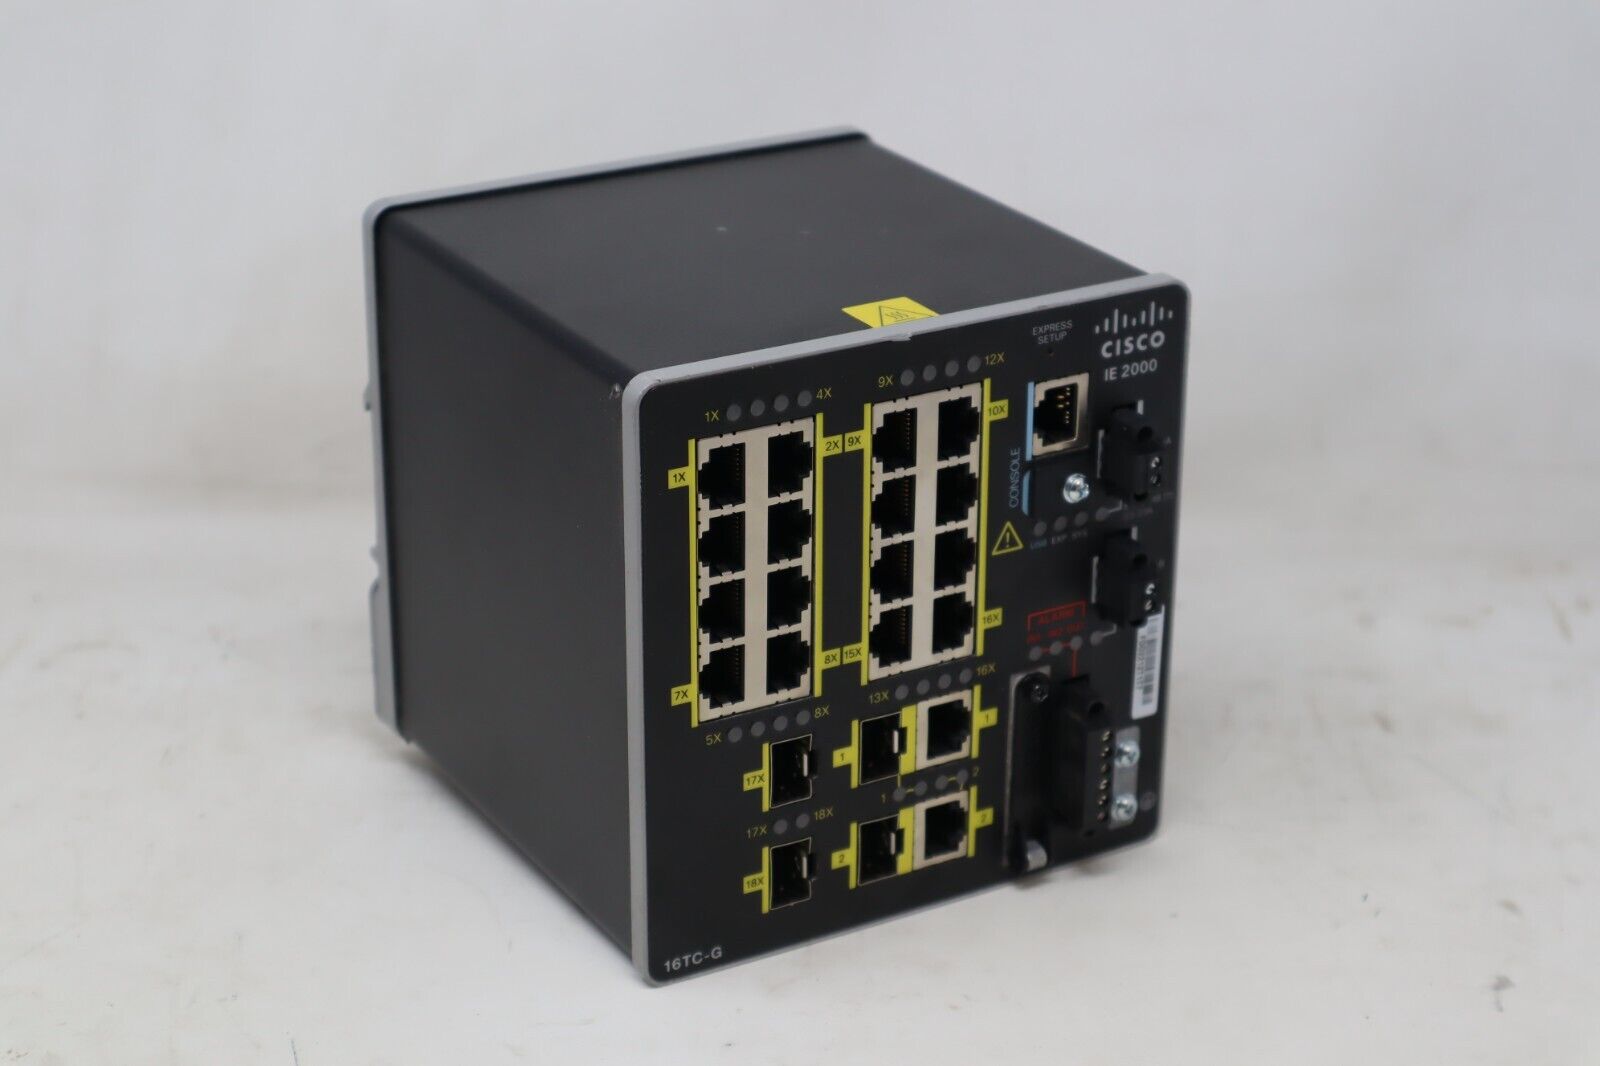 Cisco IE 2000 Series Industrial Ethernet Switch | Robust Metal Casing | Function